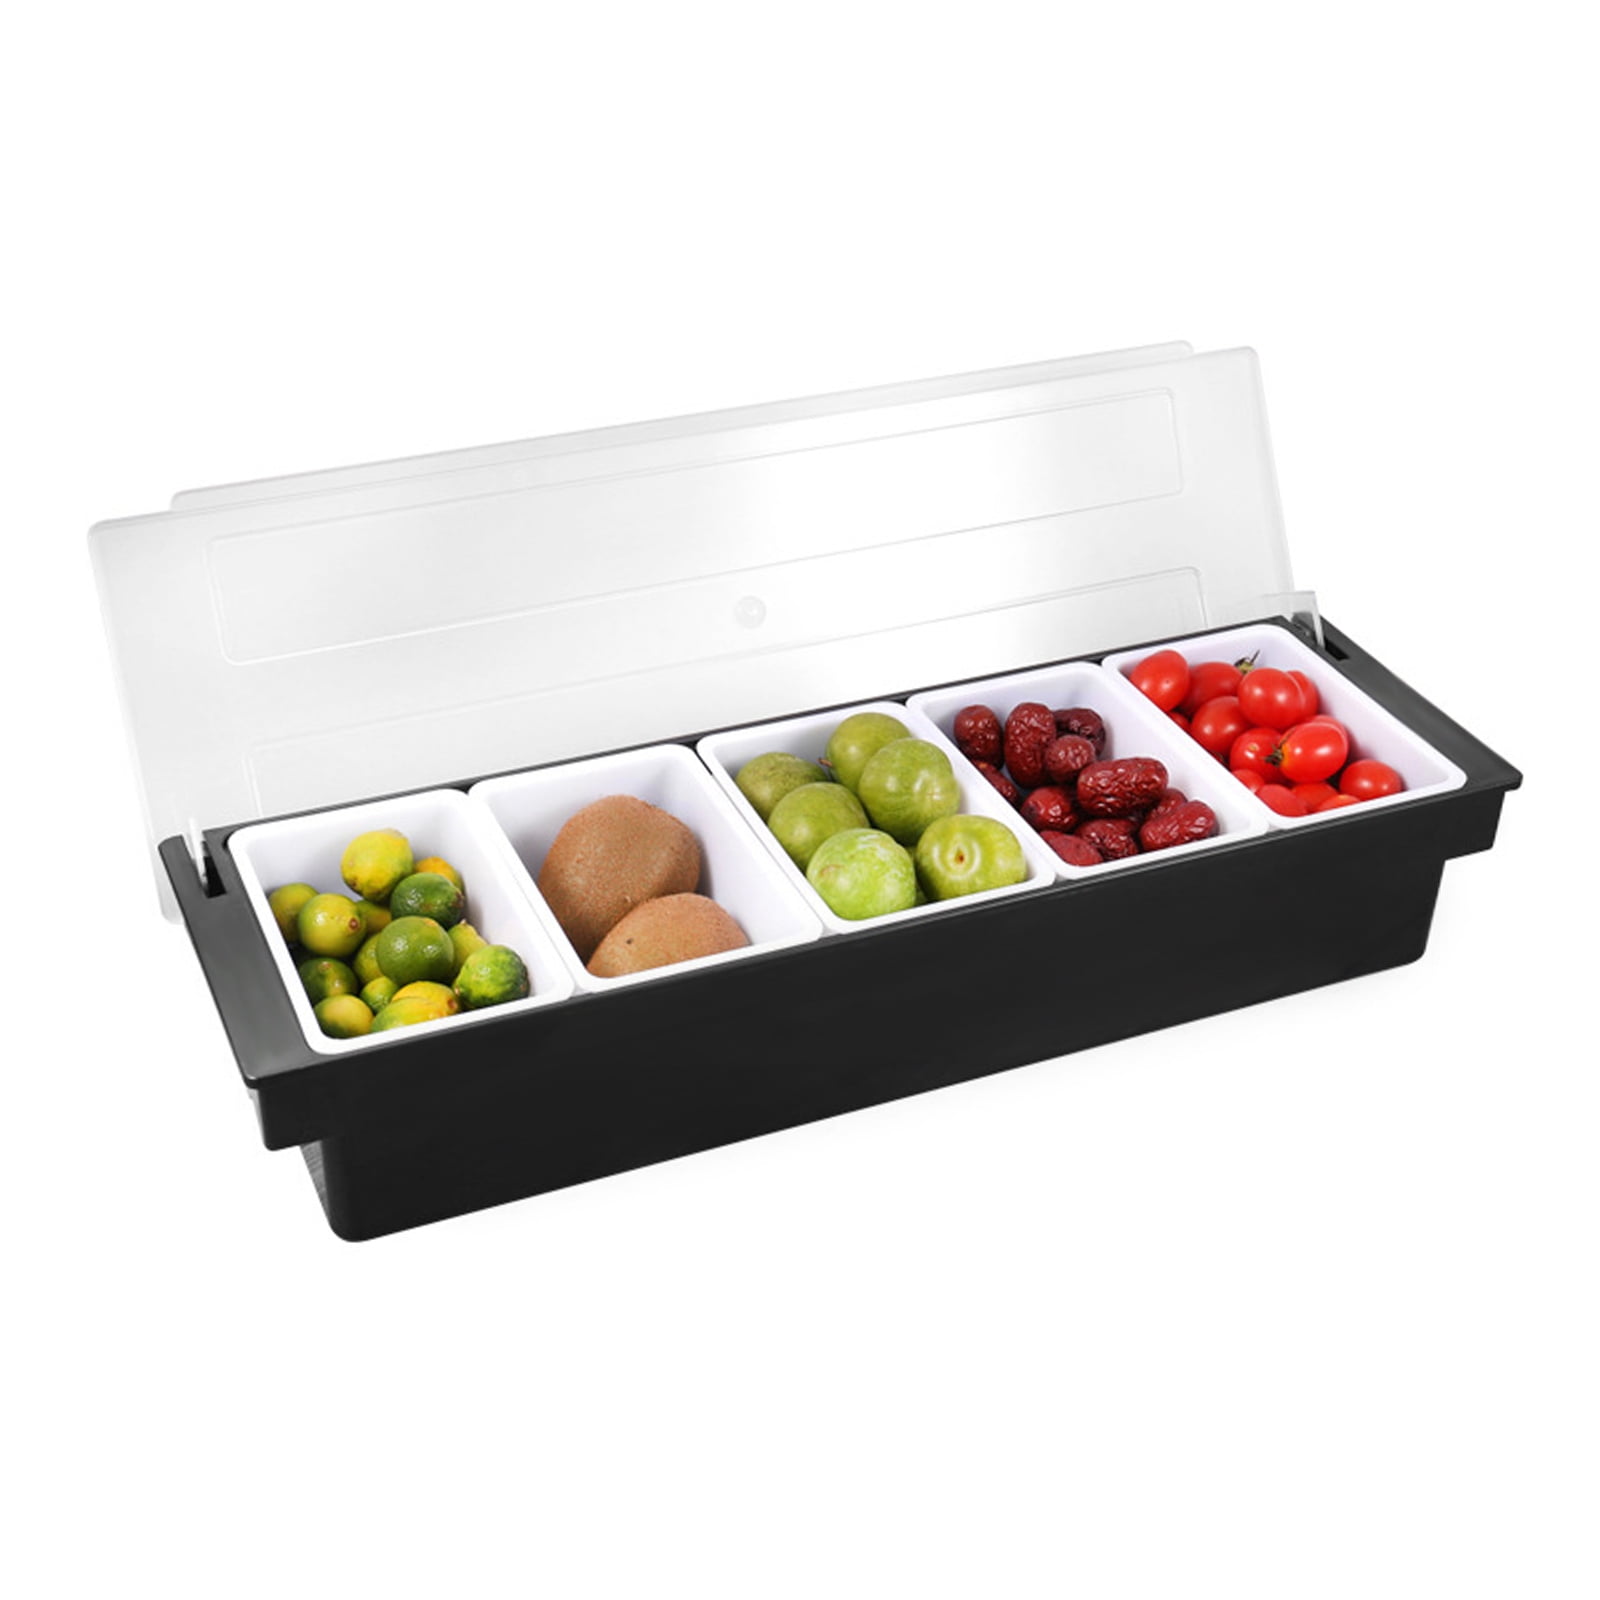 Condiment Dispenser Quart Compartment Chilled Server Bar Fruit Caddy Food Tray 4 